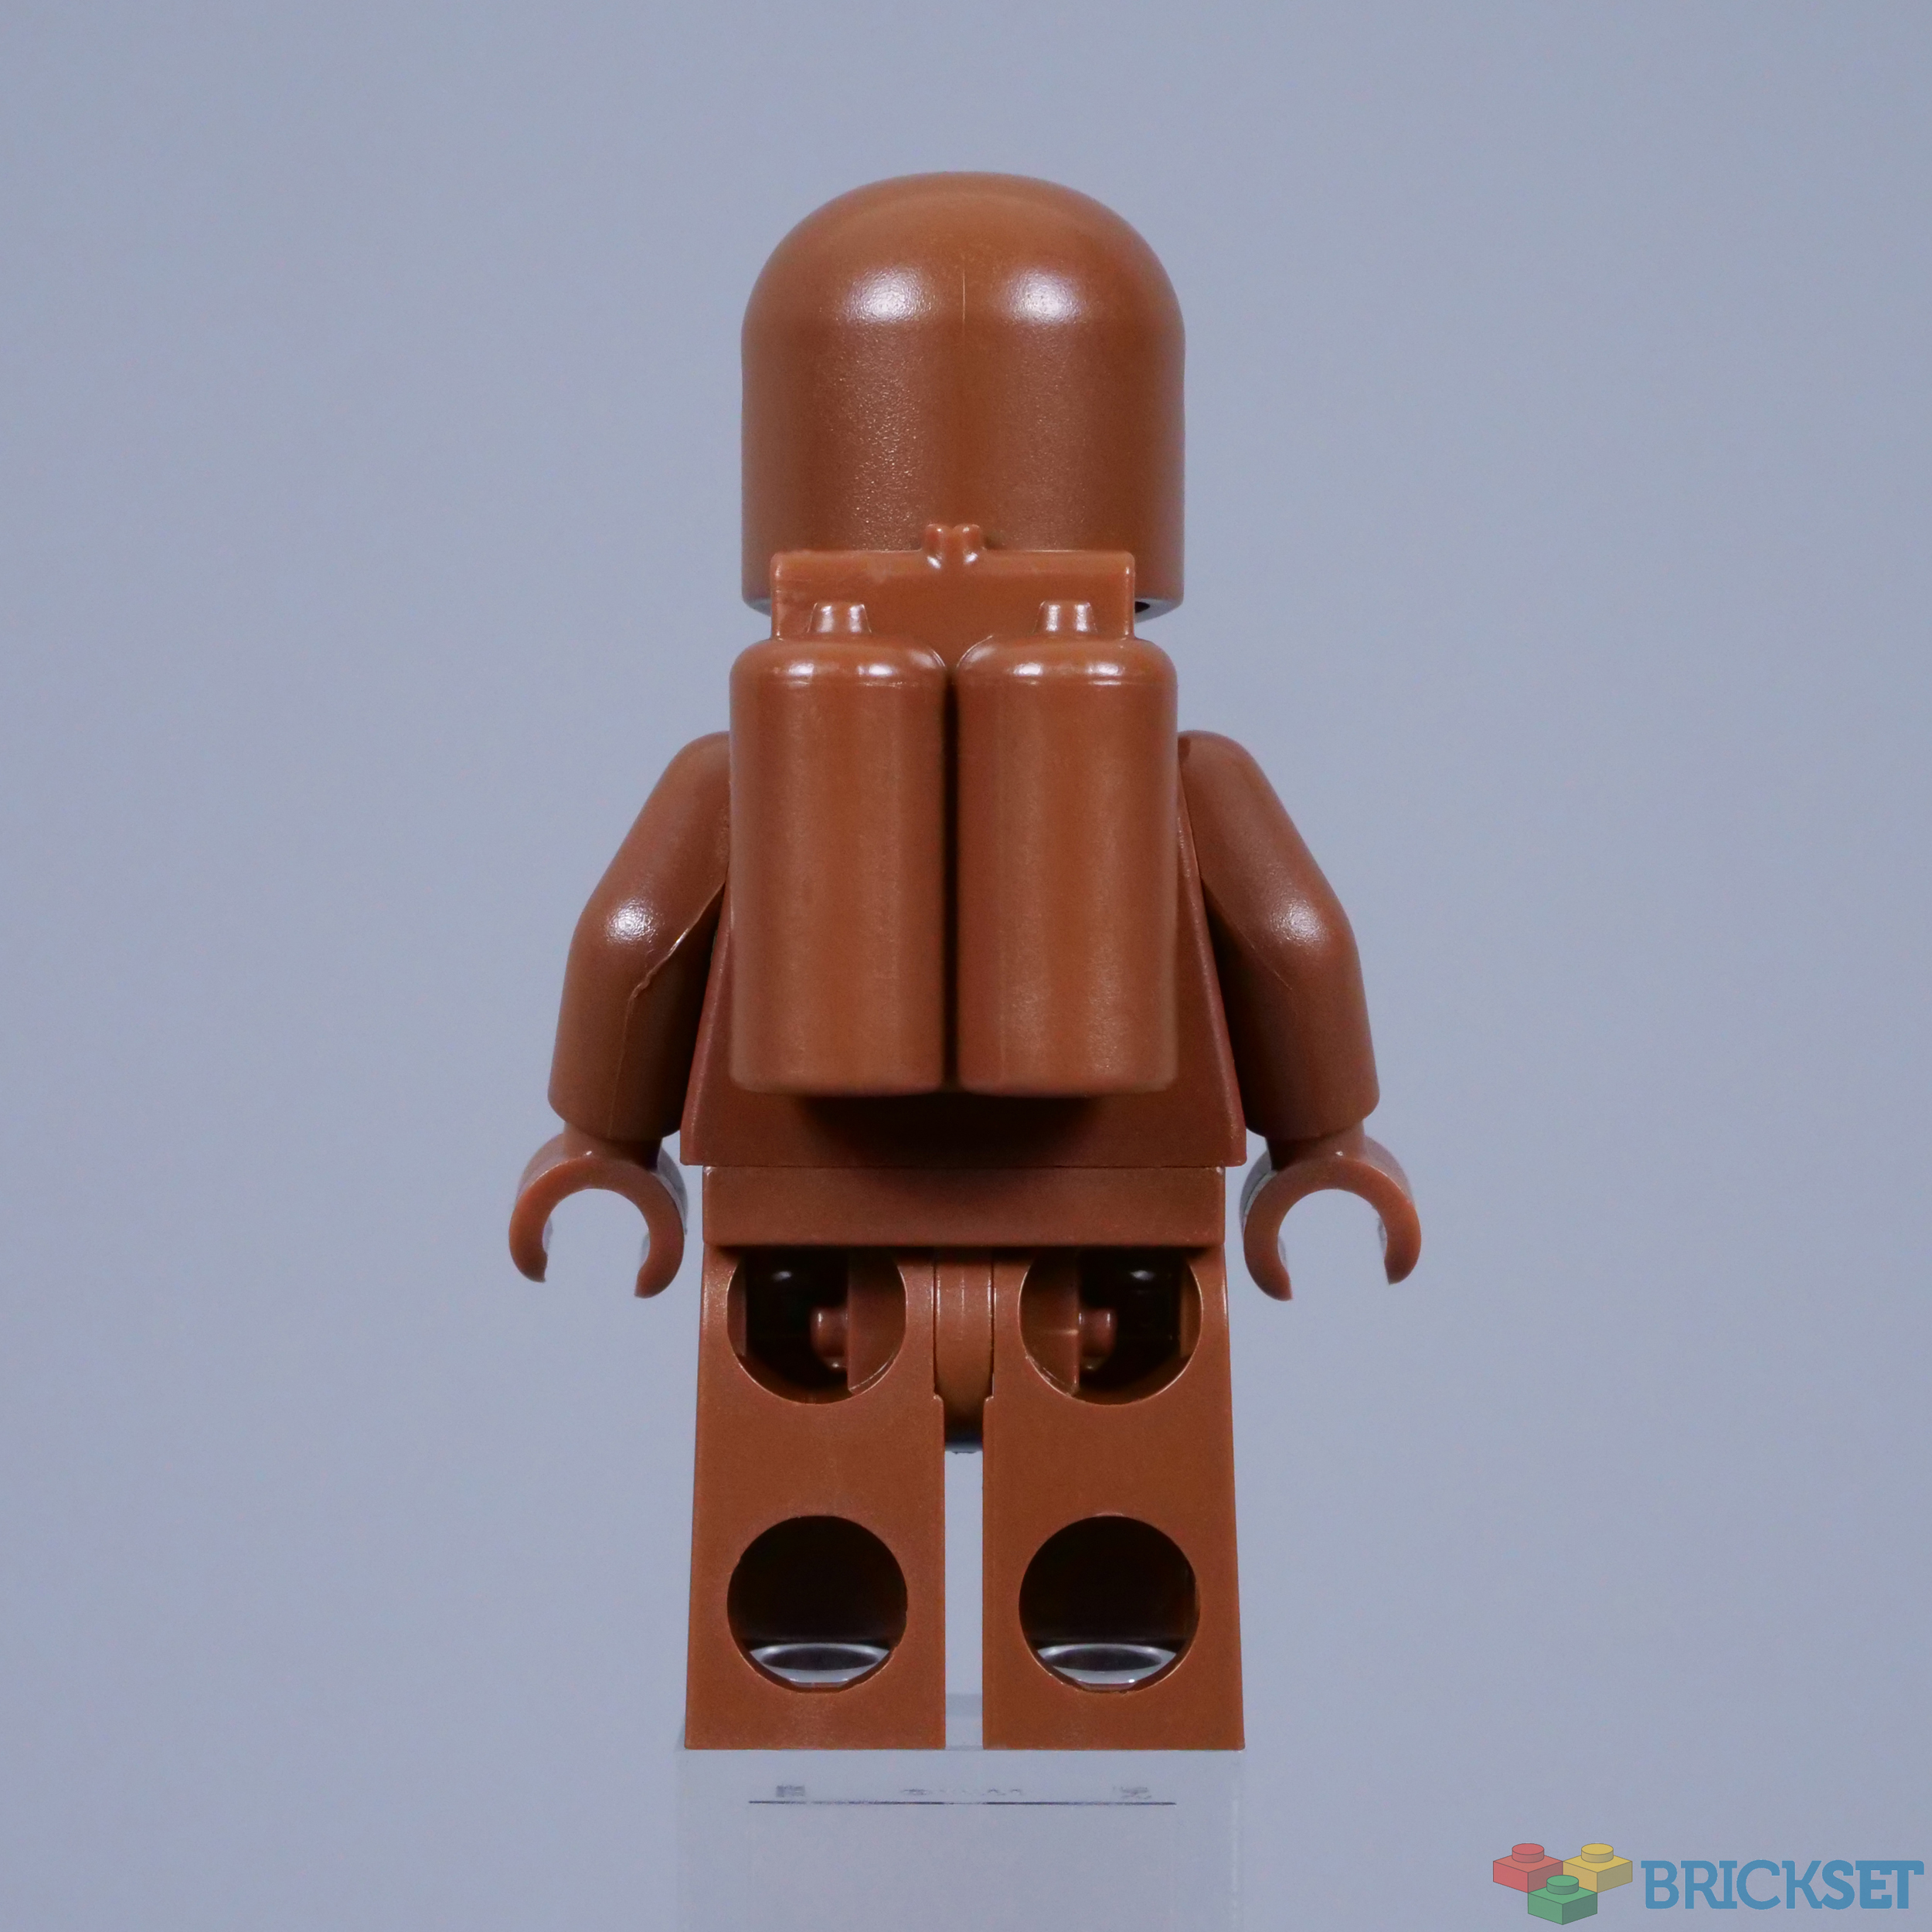  LEGO Collectable Minifigures Series 24 - Brown Astronaut and  Spacebaby 71037 : Toys & Games